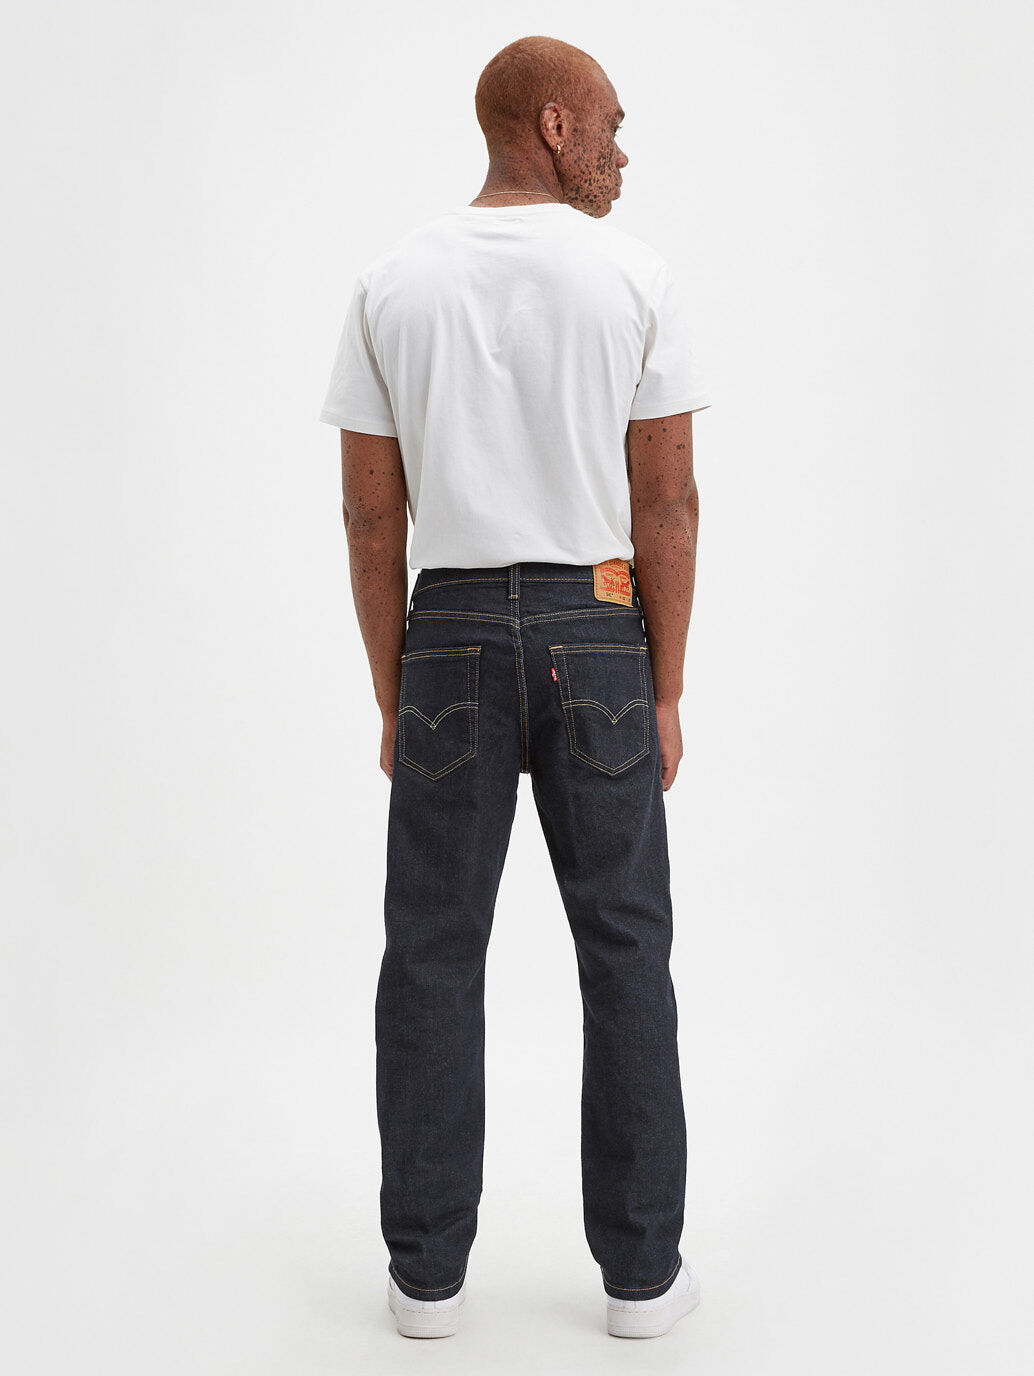 grey levis 501 big and tall